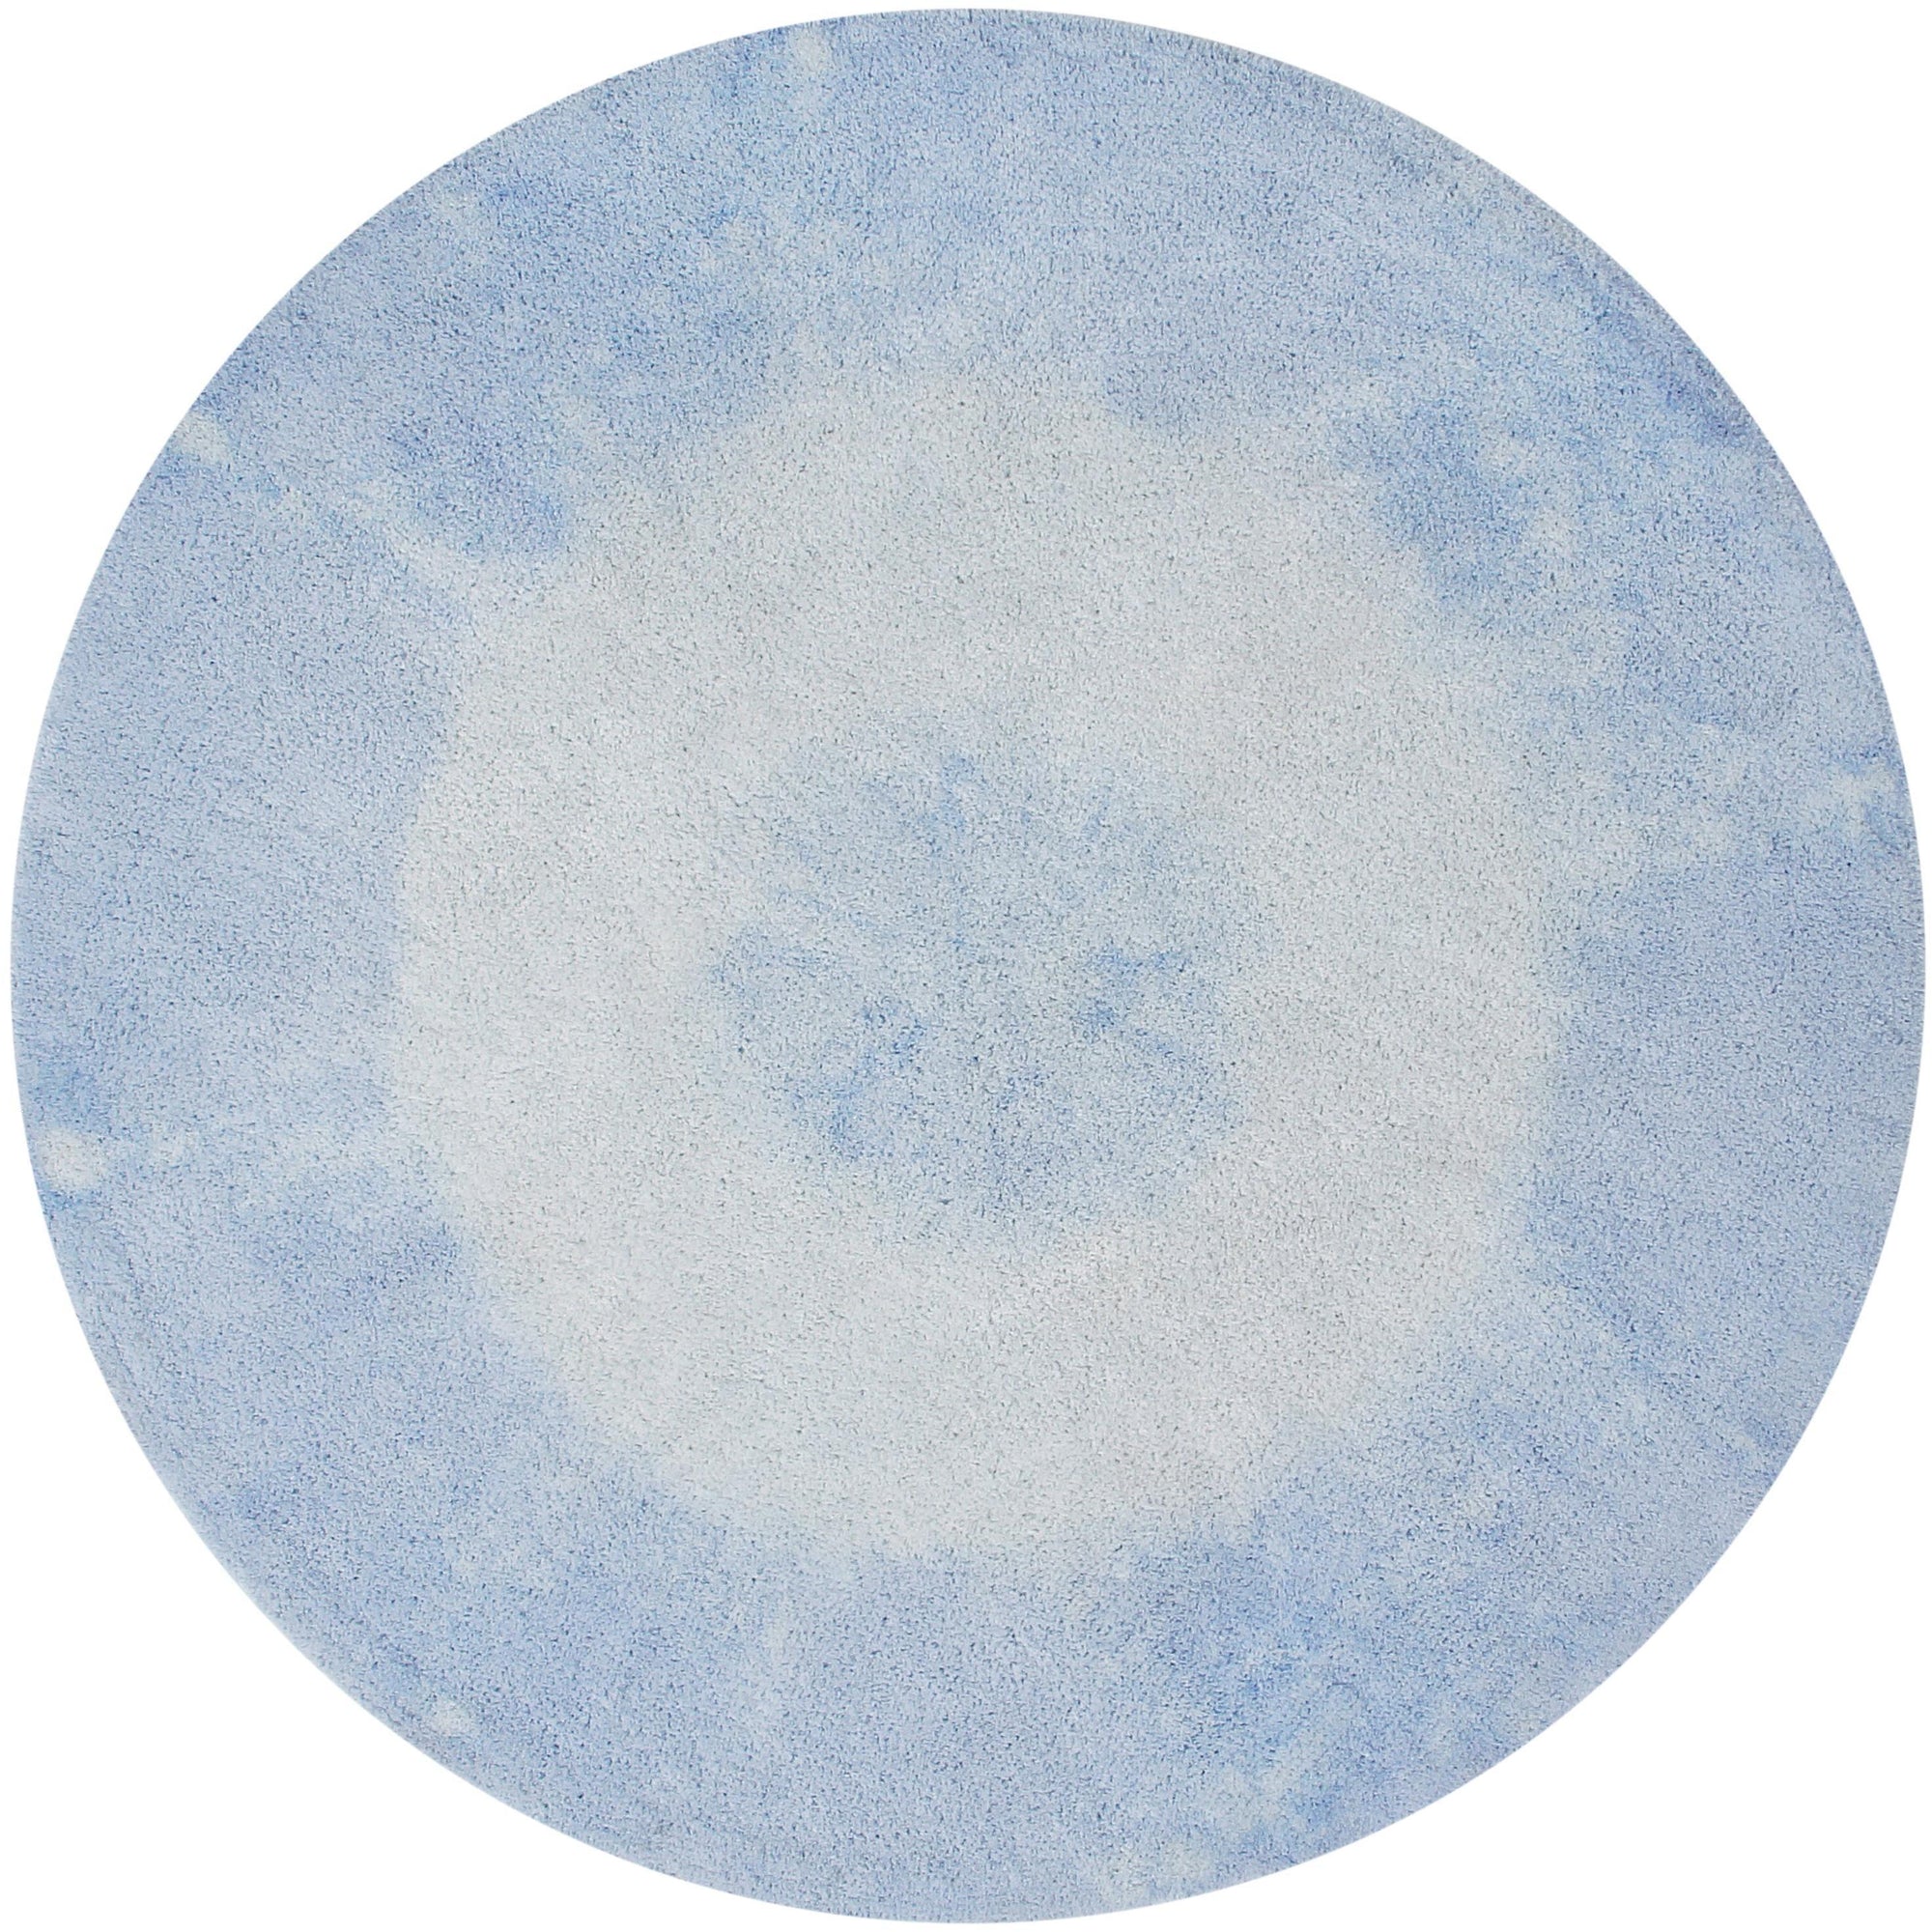 Rugs by Roo | Lorena Canals Machine Washable Tie Dye Soft Blue Round Rug-C-TIE-BL